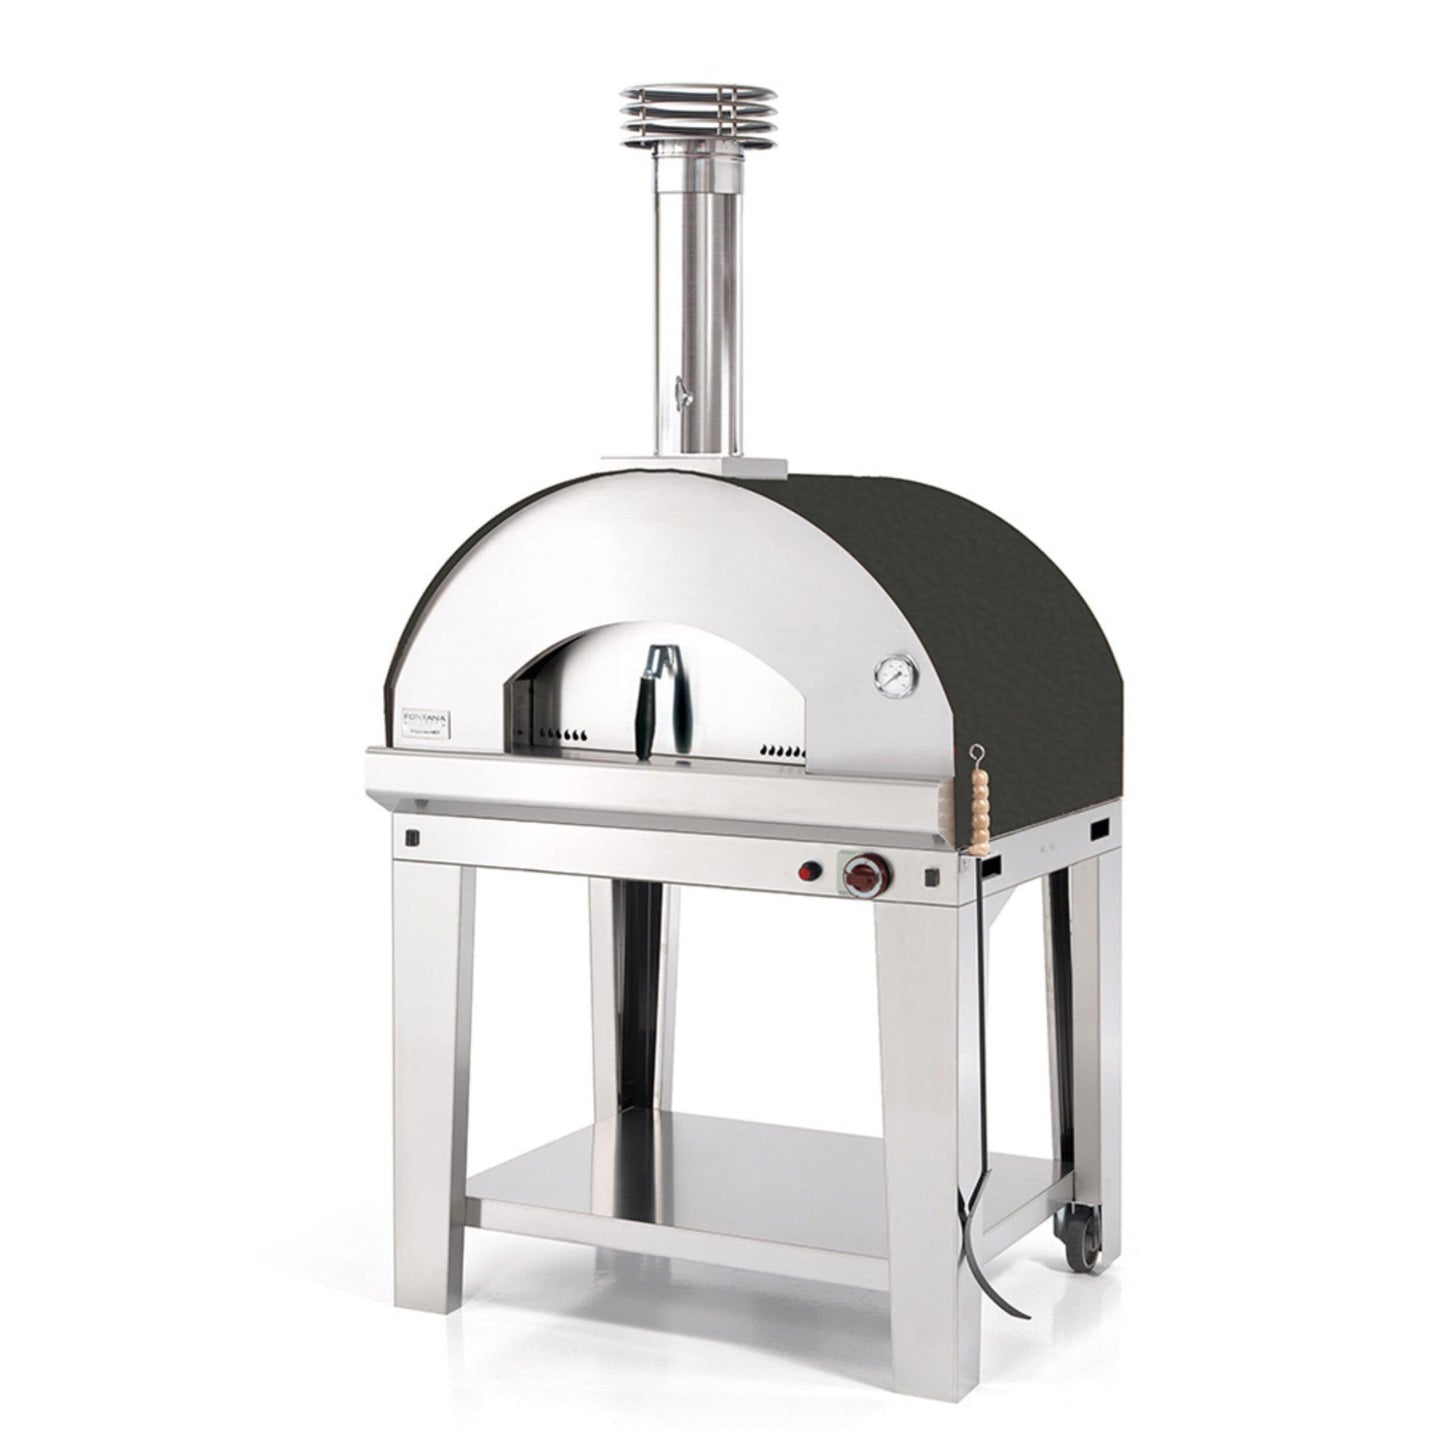 Fontana Mangiafuoco Gas Pizza Oven Including Trolley